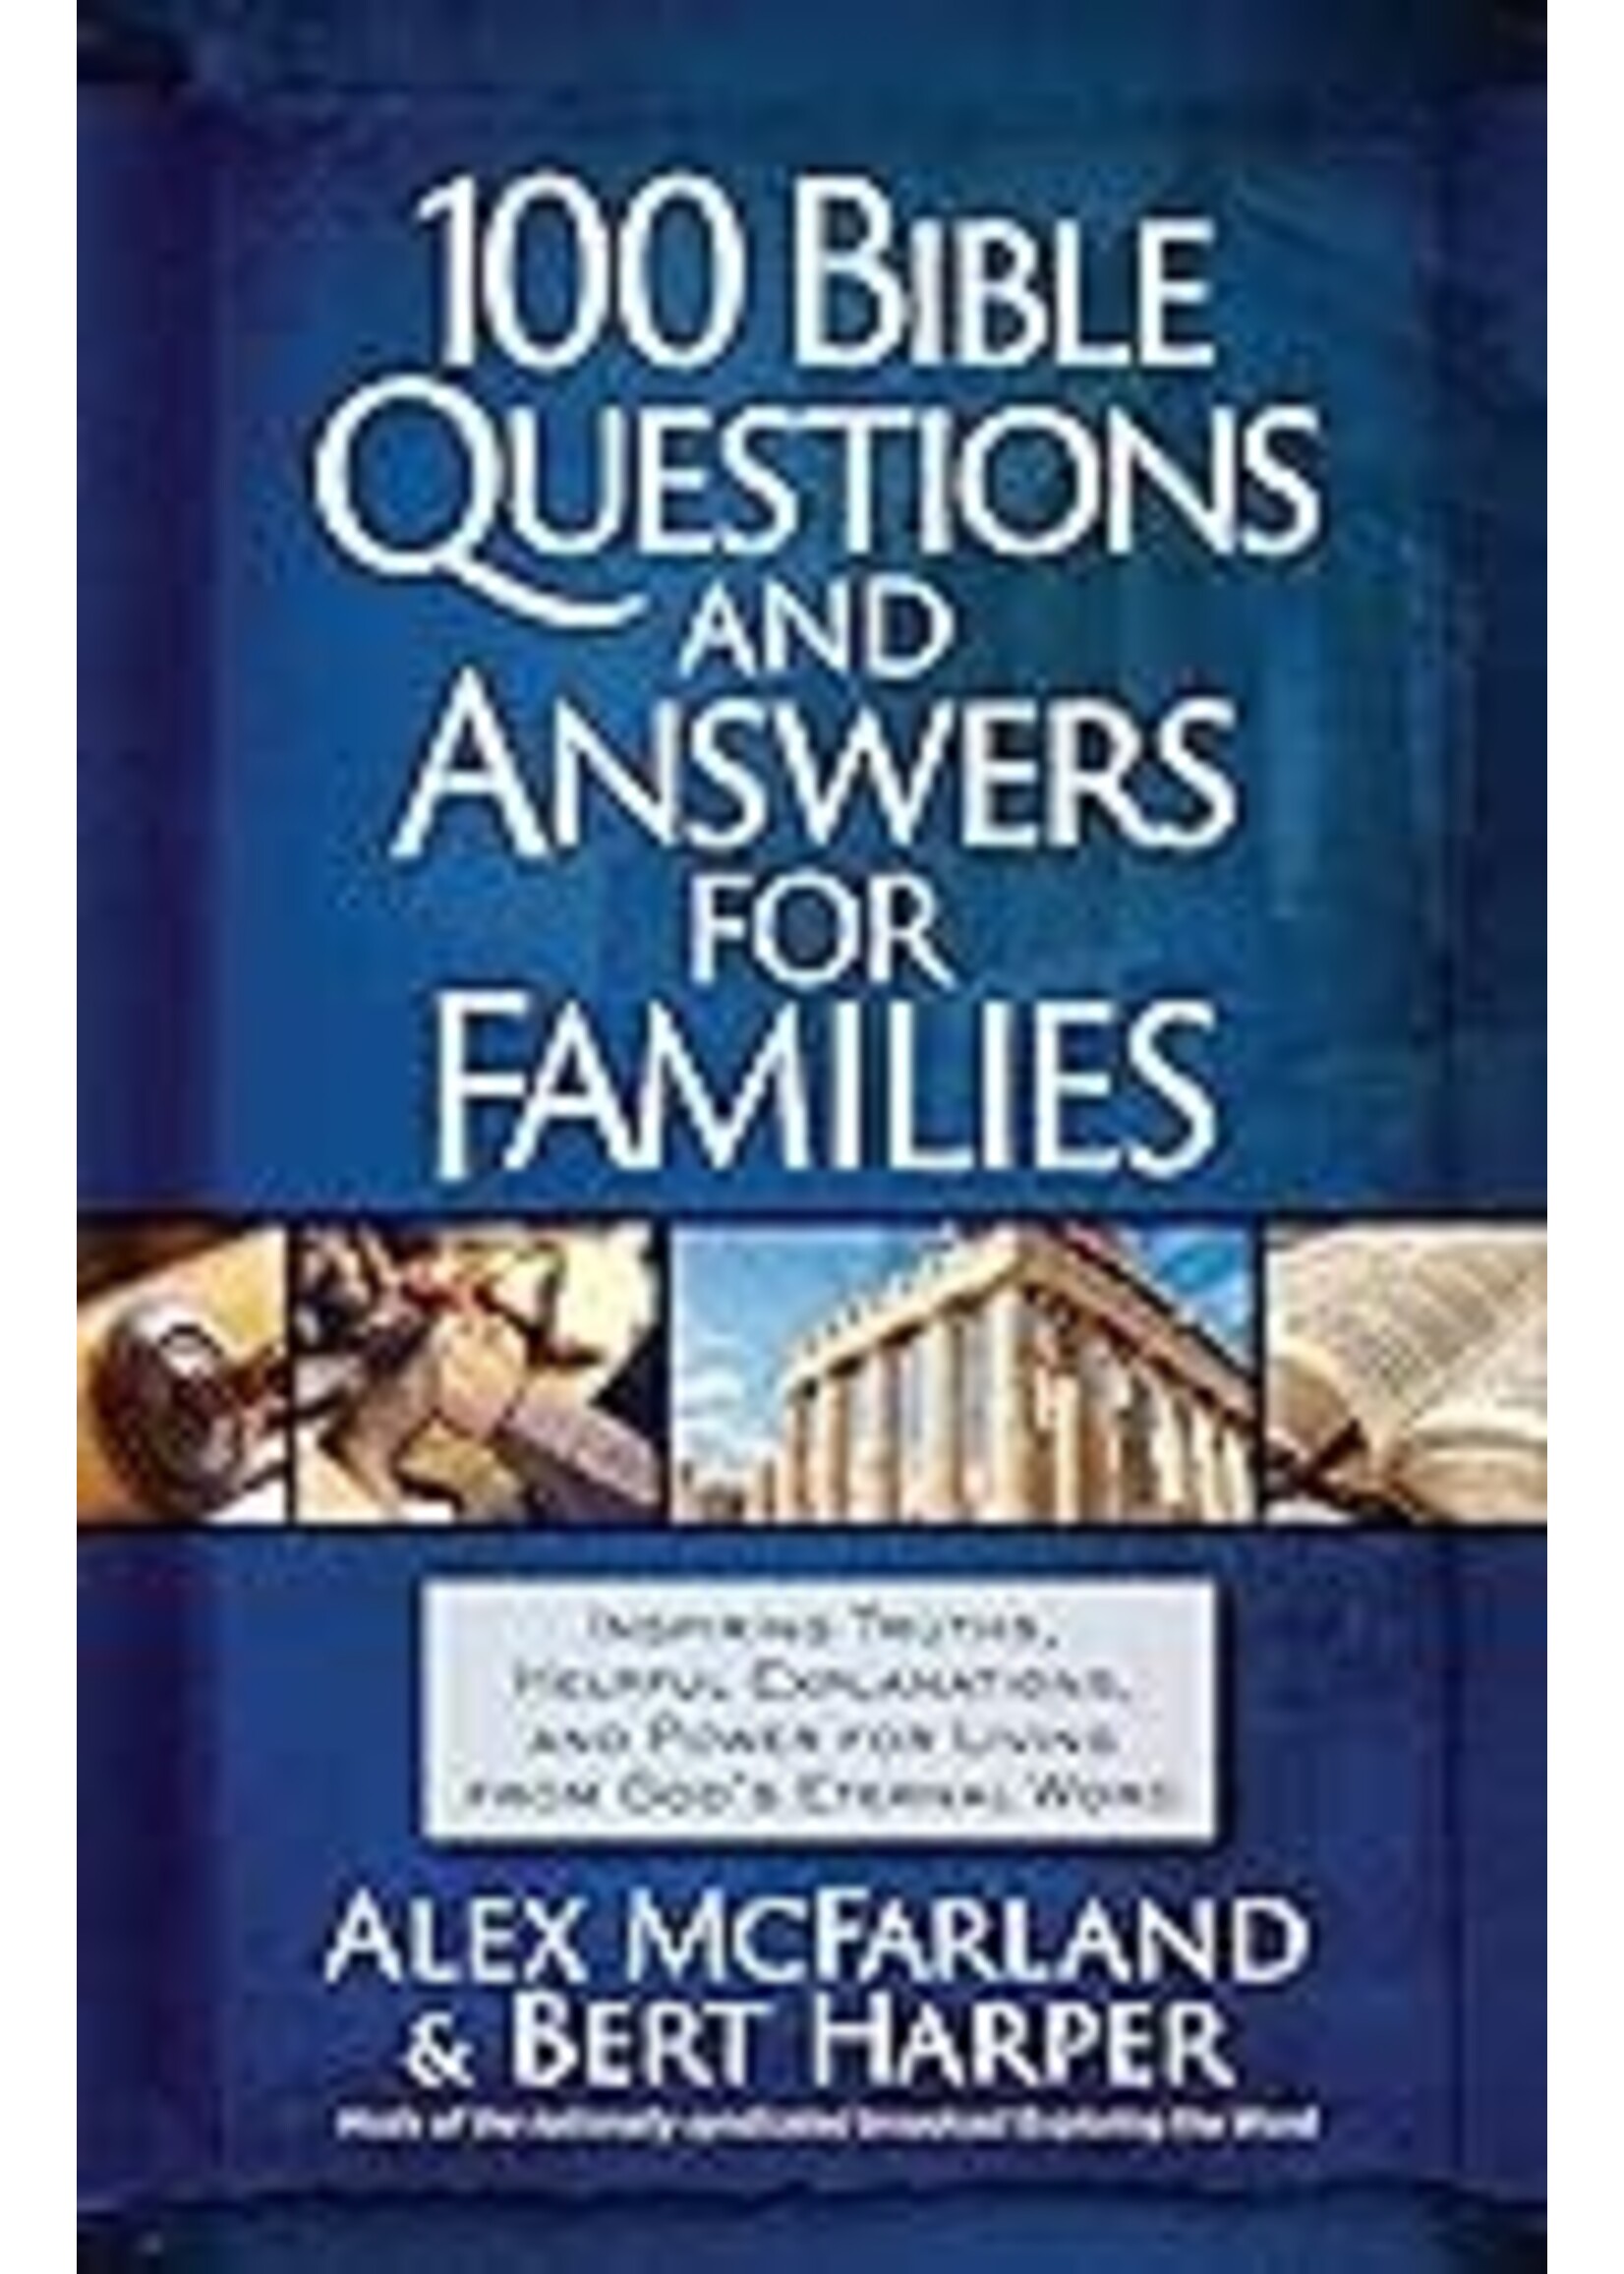 100 Bible Questions and Answers for Families